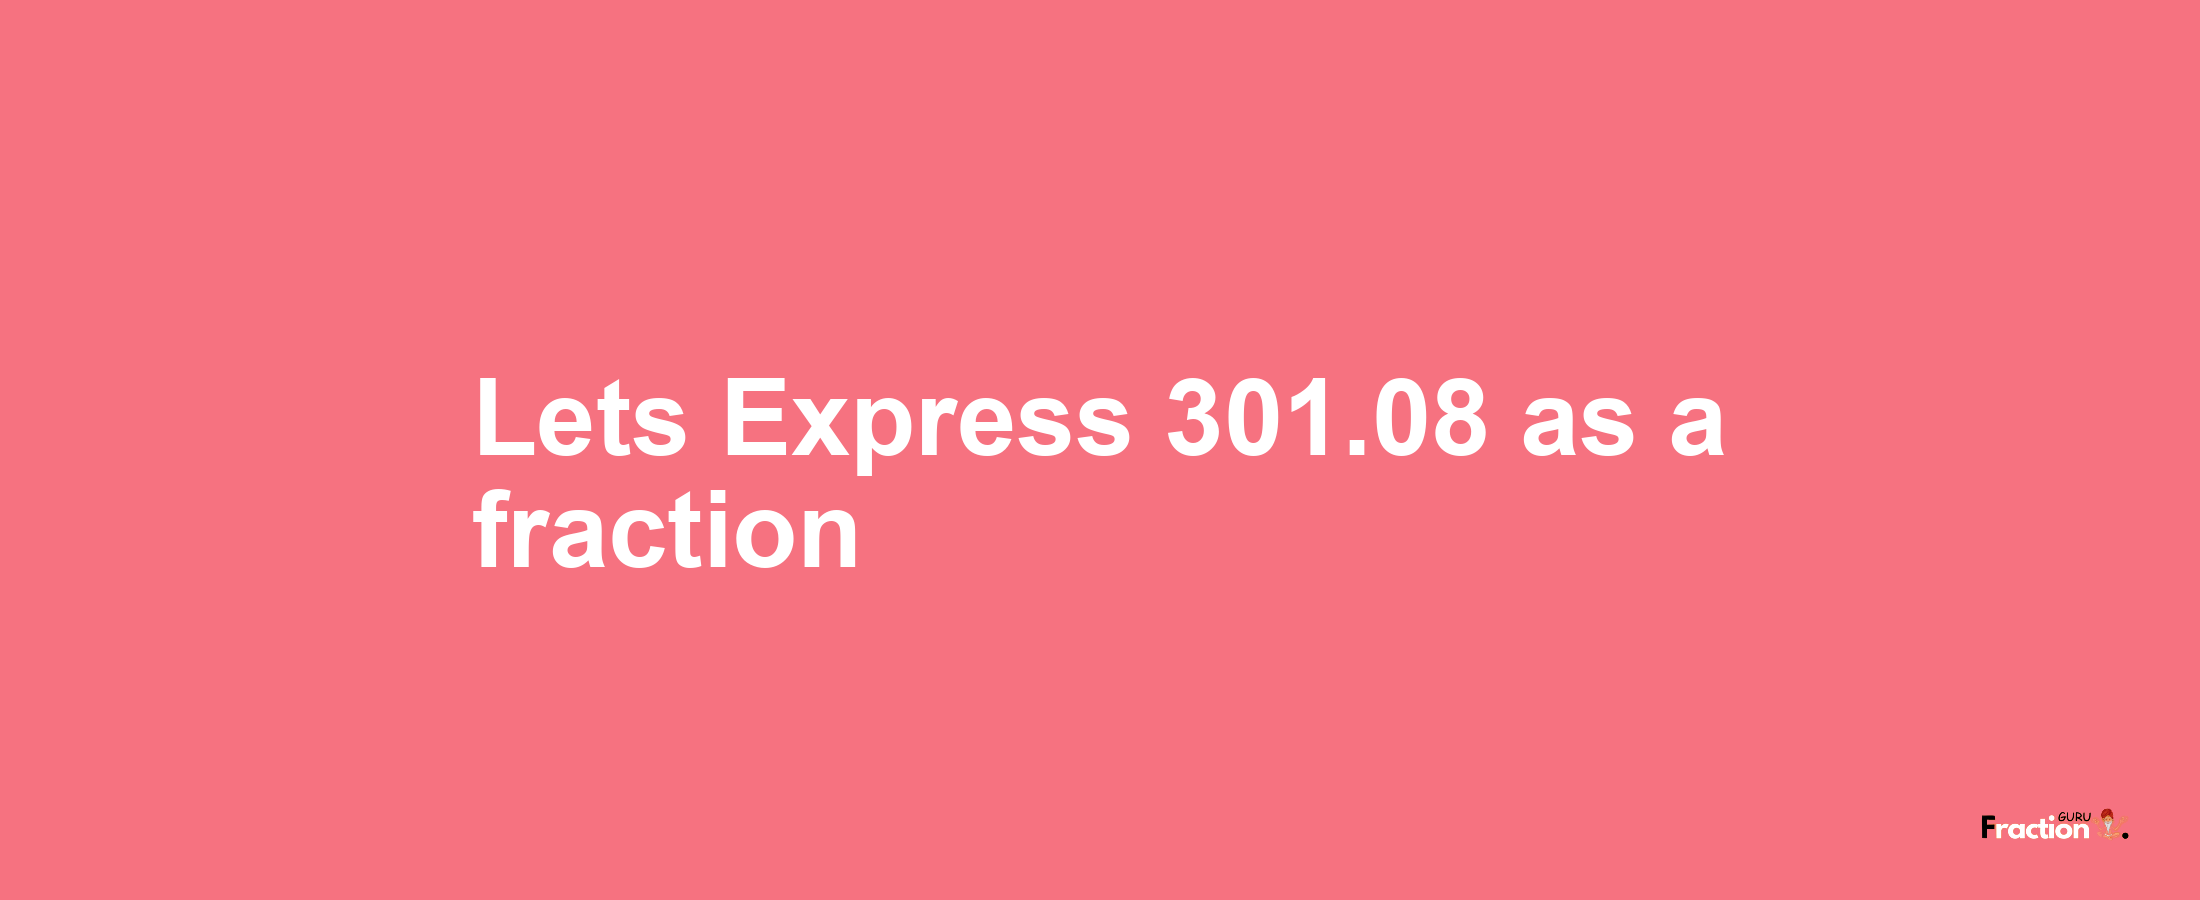 Lets Express 301.08 as afraction